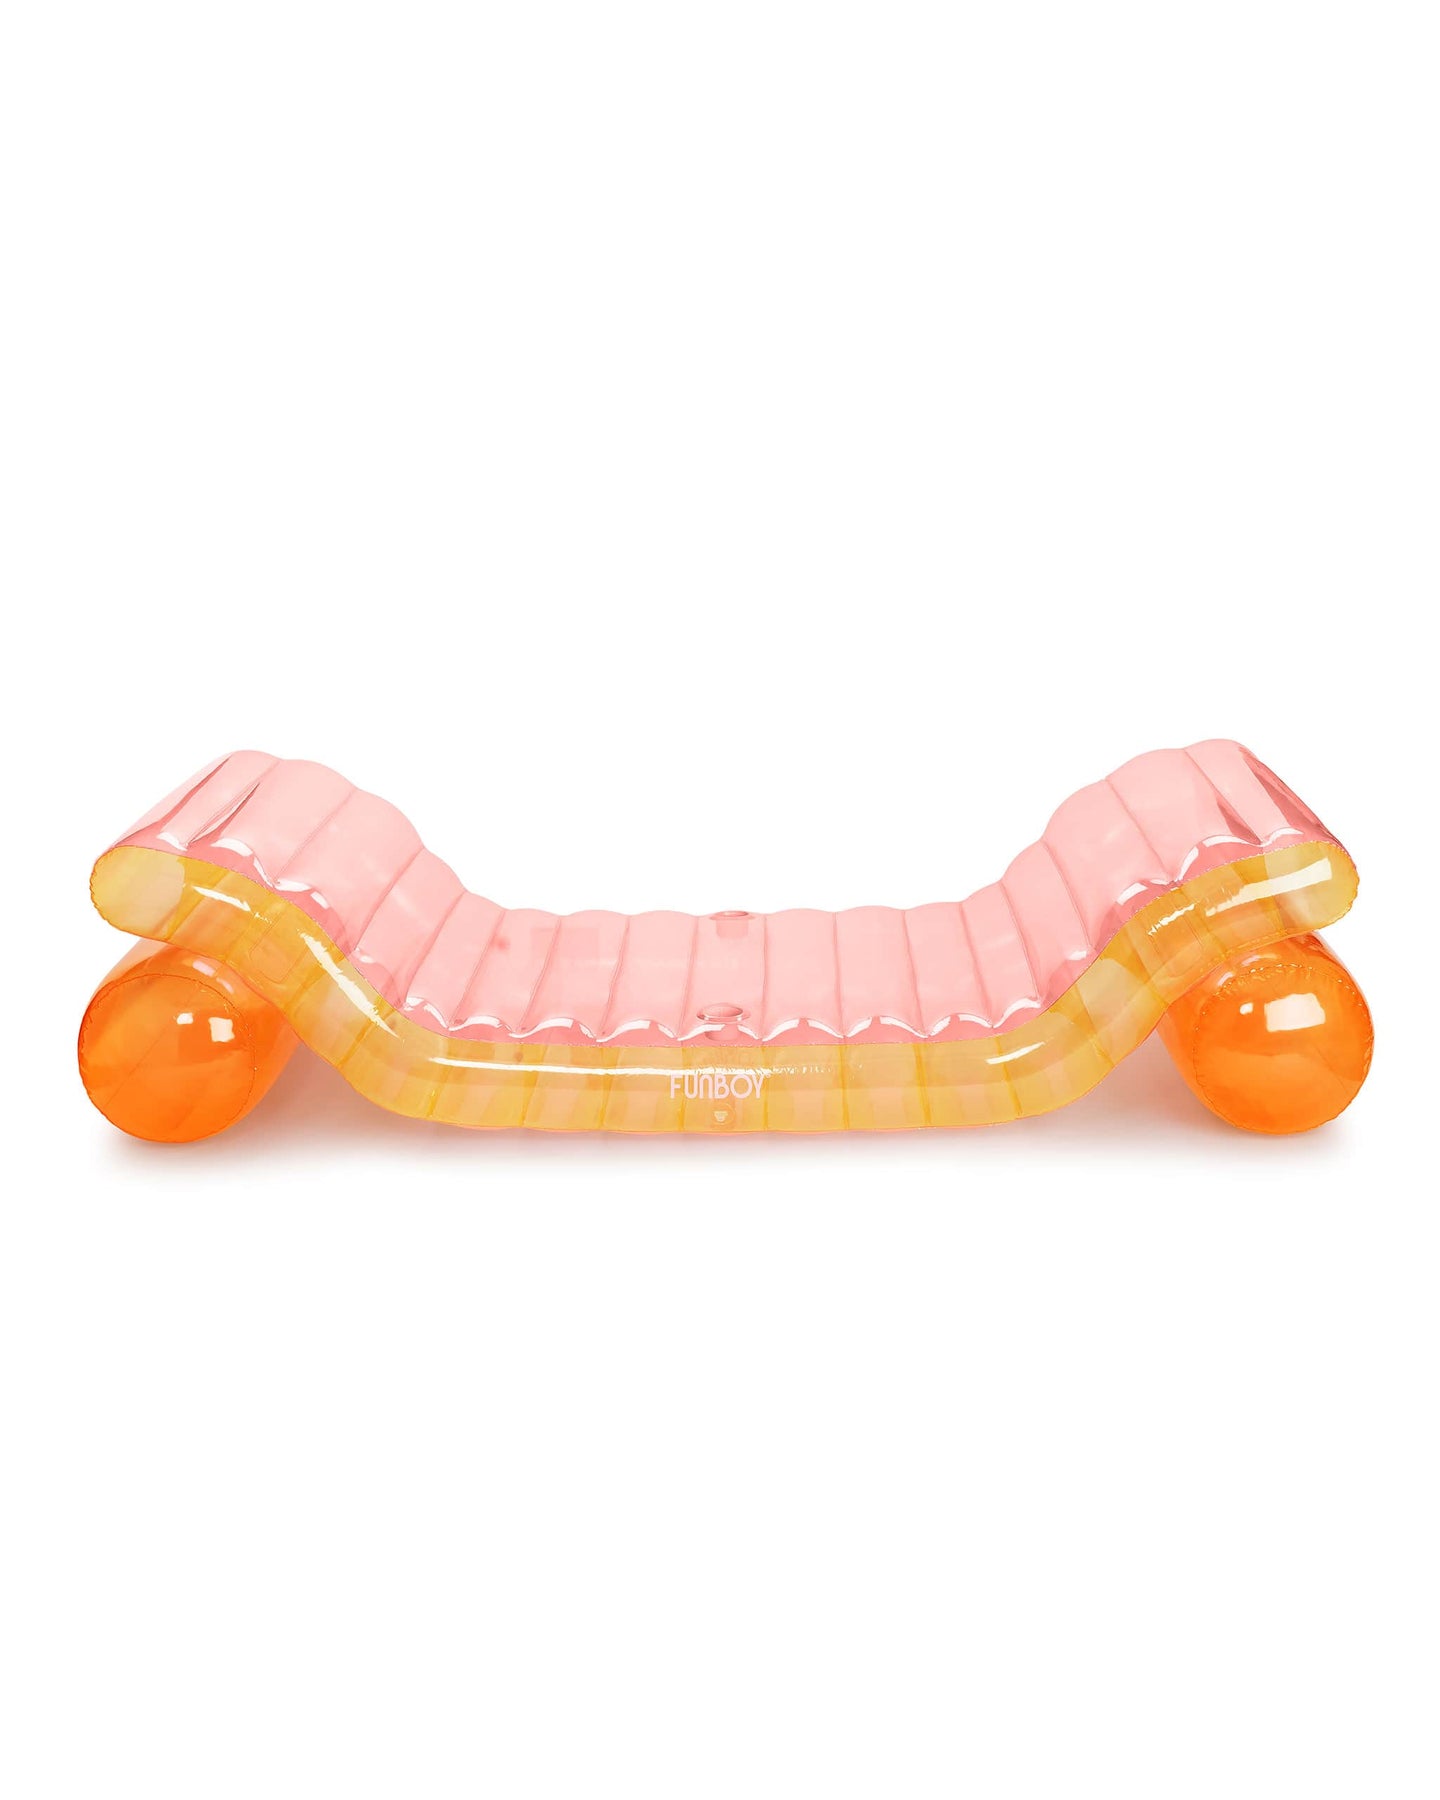 Best Pool Float - Rainbow Clear Chaise Lounger